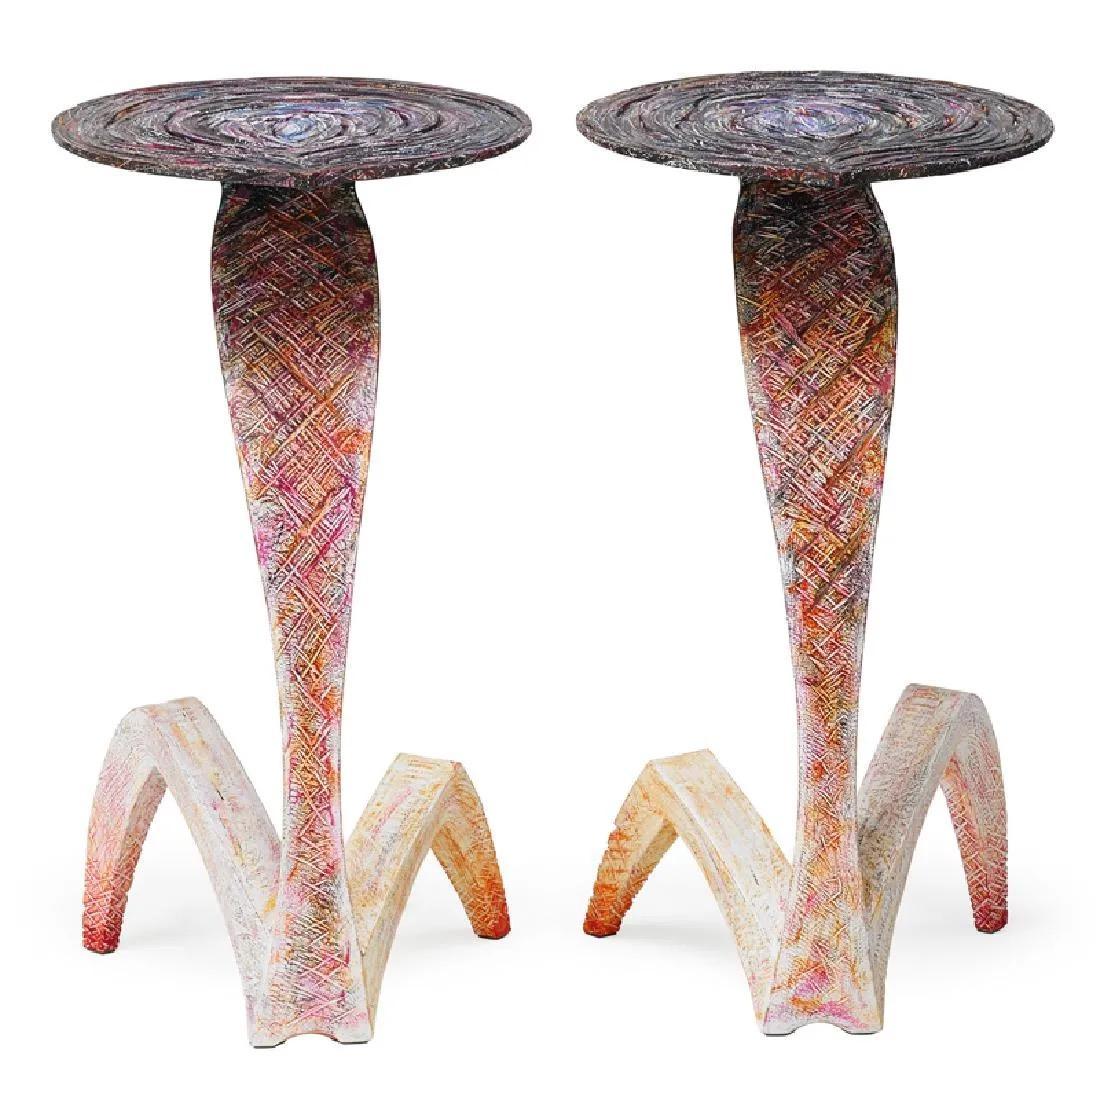 Yves Boucard Pair of Carved Wood Cobra Snake Painted Tall Modern Tables In Excellent Condition For Sale In Philadelphia, PA